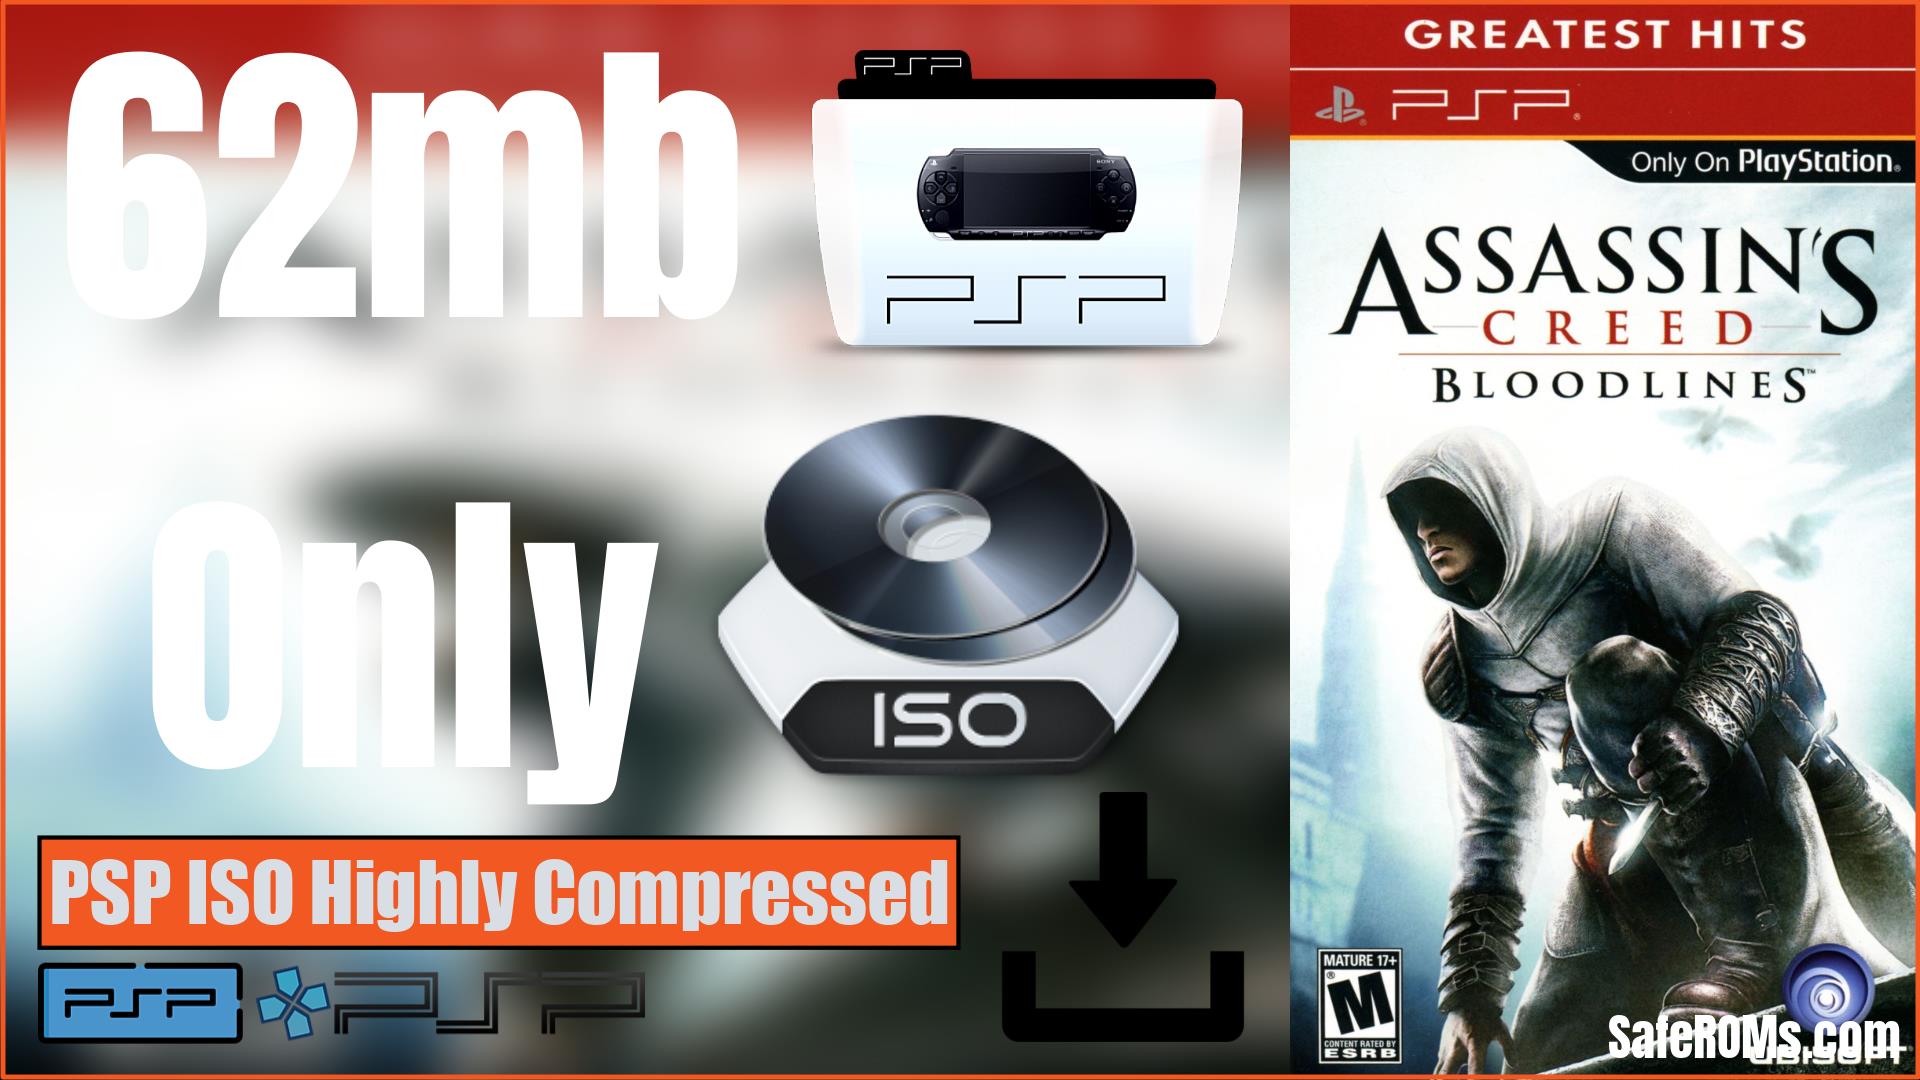 30MB] Assassin's Creed Bloodlines Highly Compressed PSP ISO